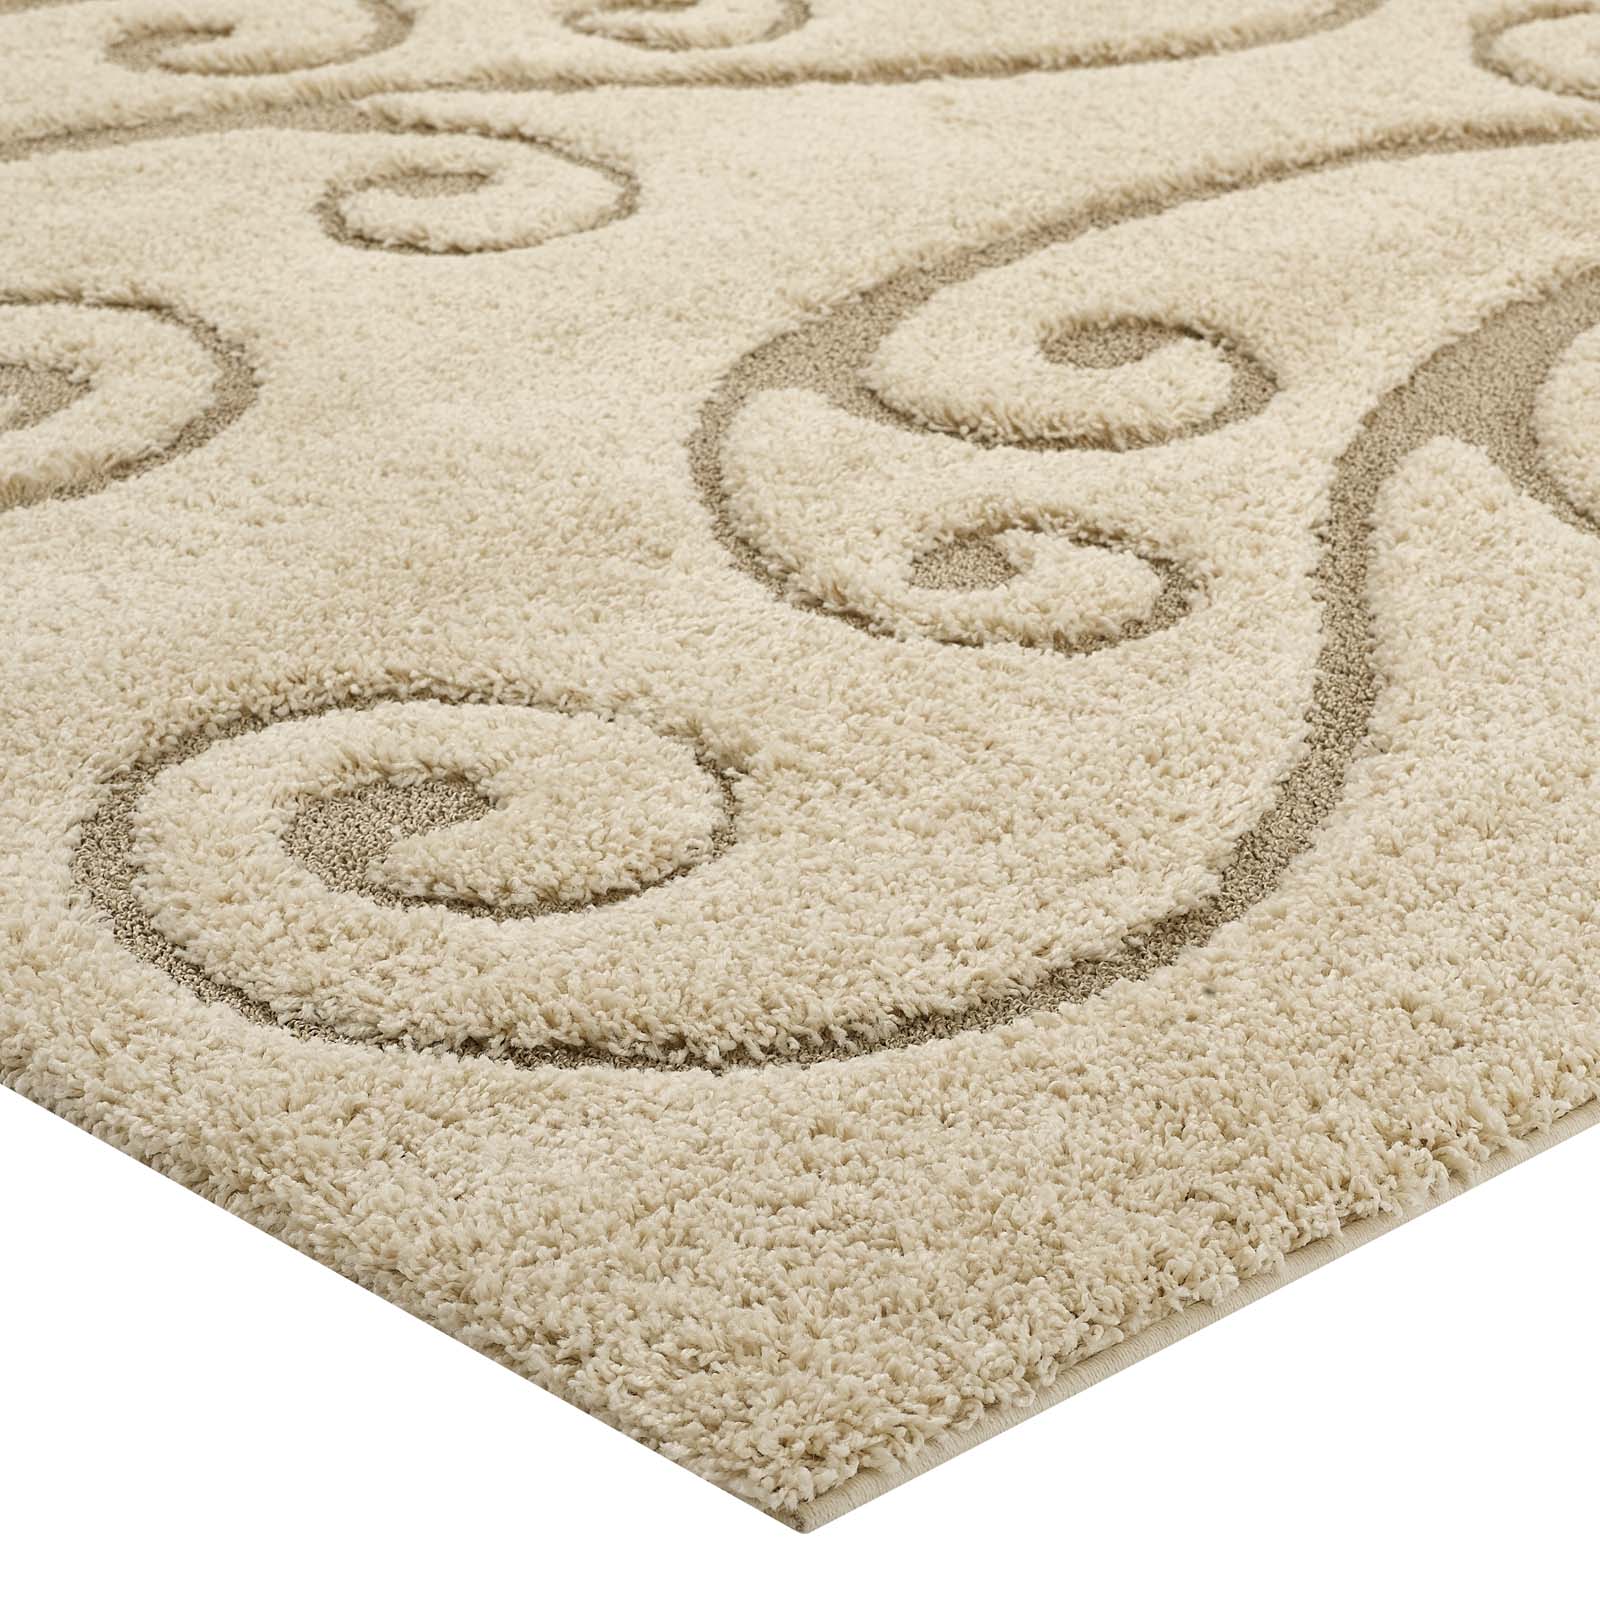 Modway Indoor Rugs - Jubilant Sprout Scrolling Vine 5x8 Shag Area Rug Creame & Beige